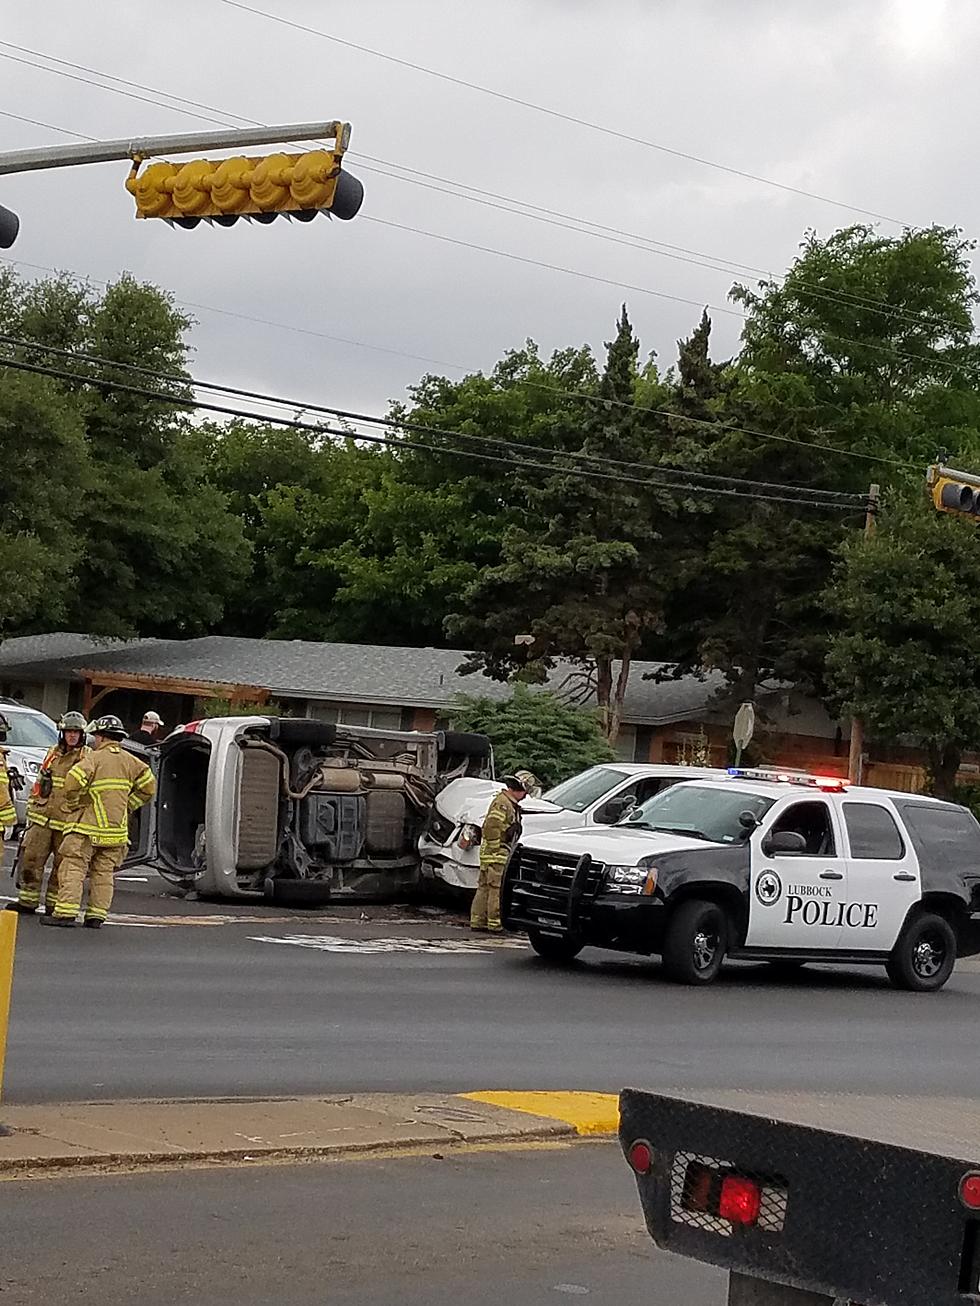 Police Respond to Multi-Vehicle Accident in Central Lubbock